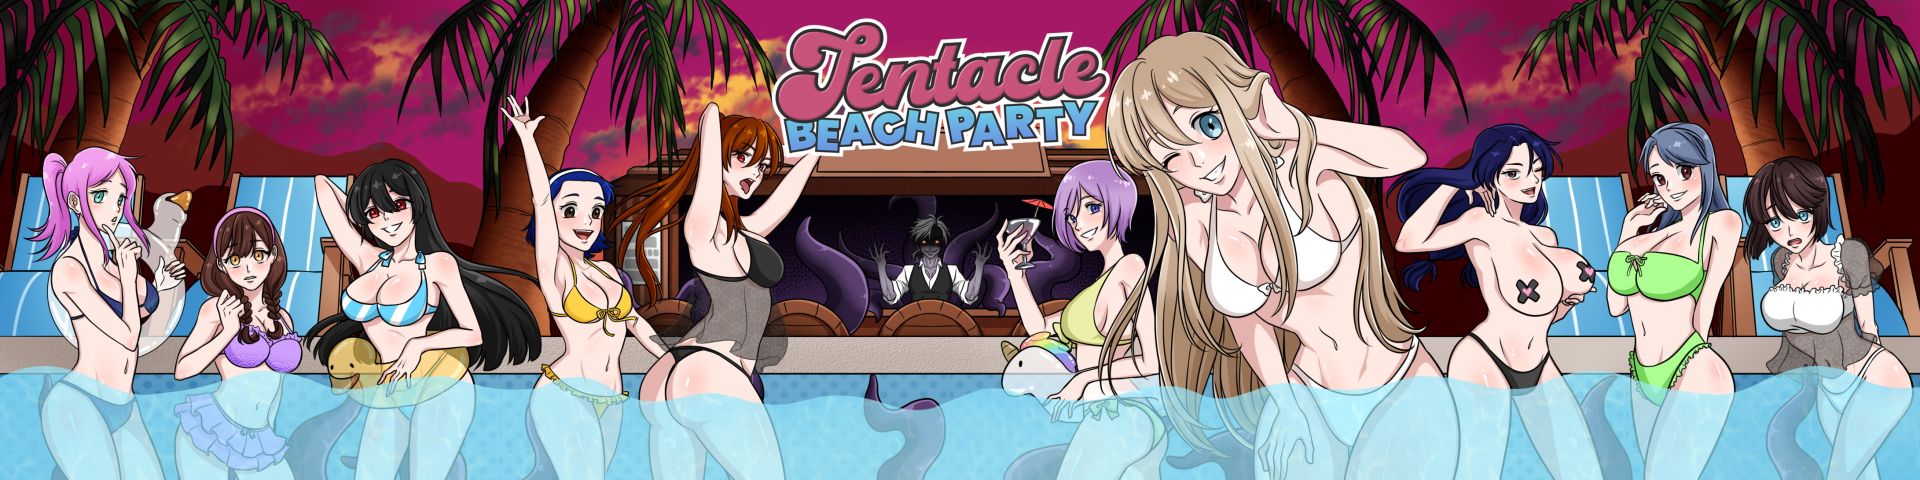 Tentacle Beach Party Adult Game Android Download (6)